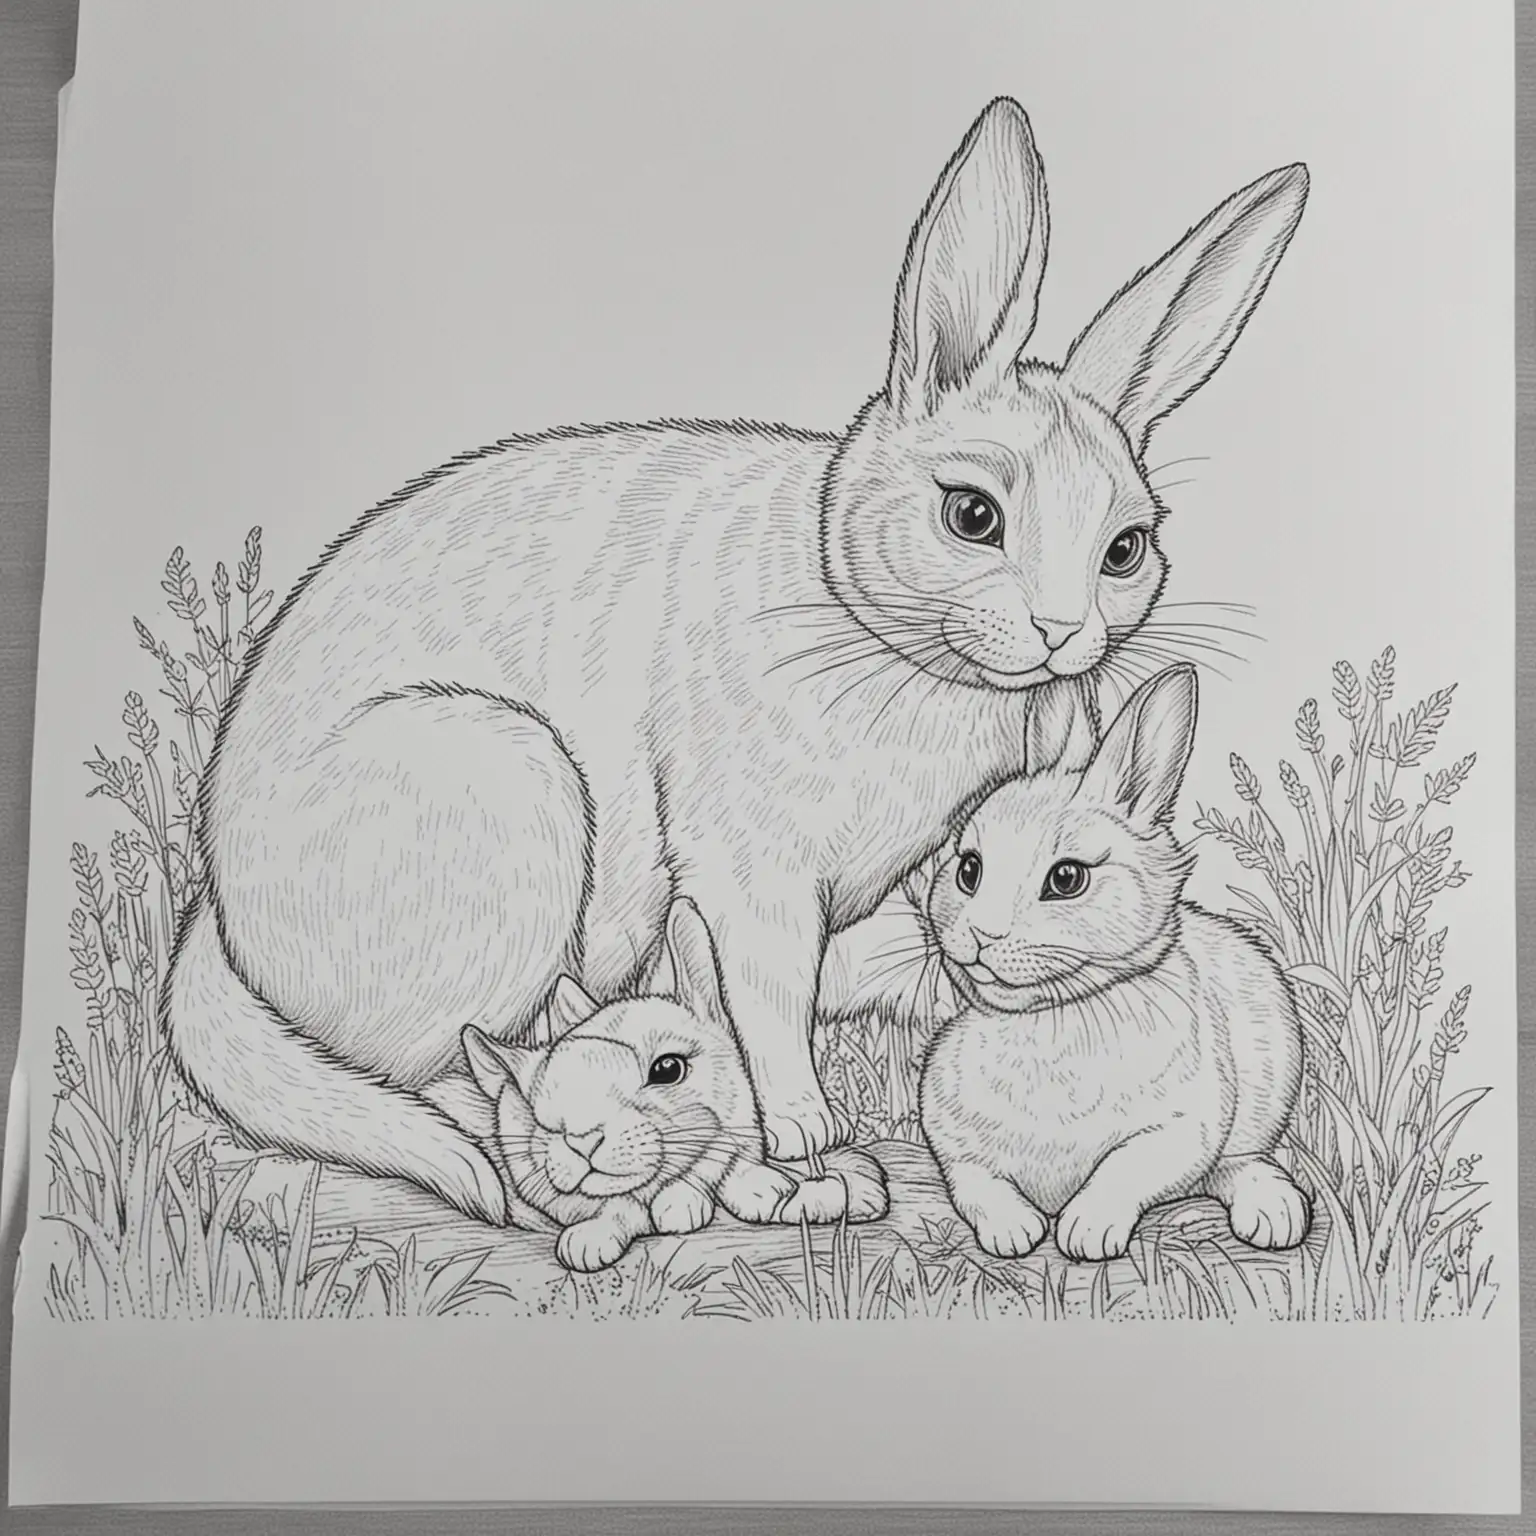 Create a coloring page for 4 a 4-year-old so that he can color it.
He wants to have a cat laying on a rabbit.
So there are two animals: the cat and the rabbit. One animal is laying on the other one.